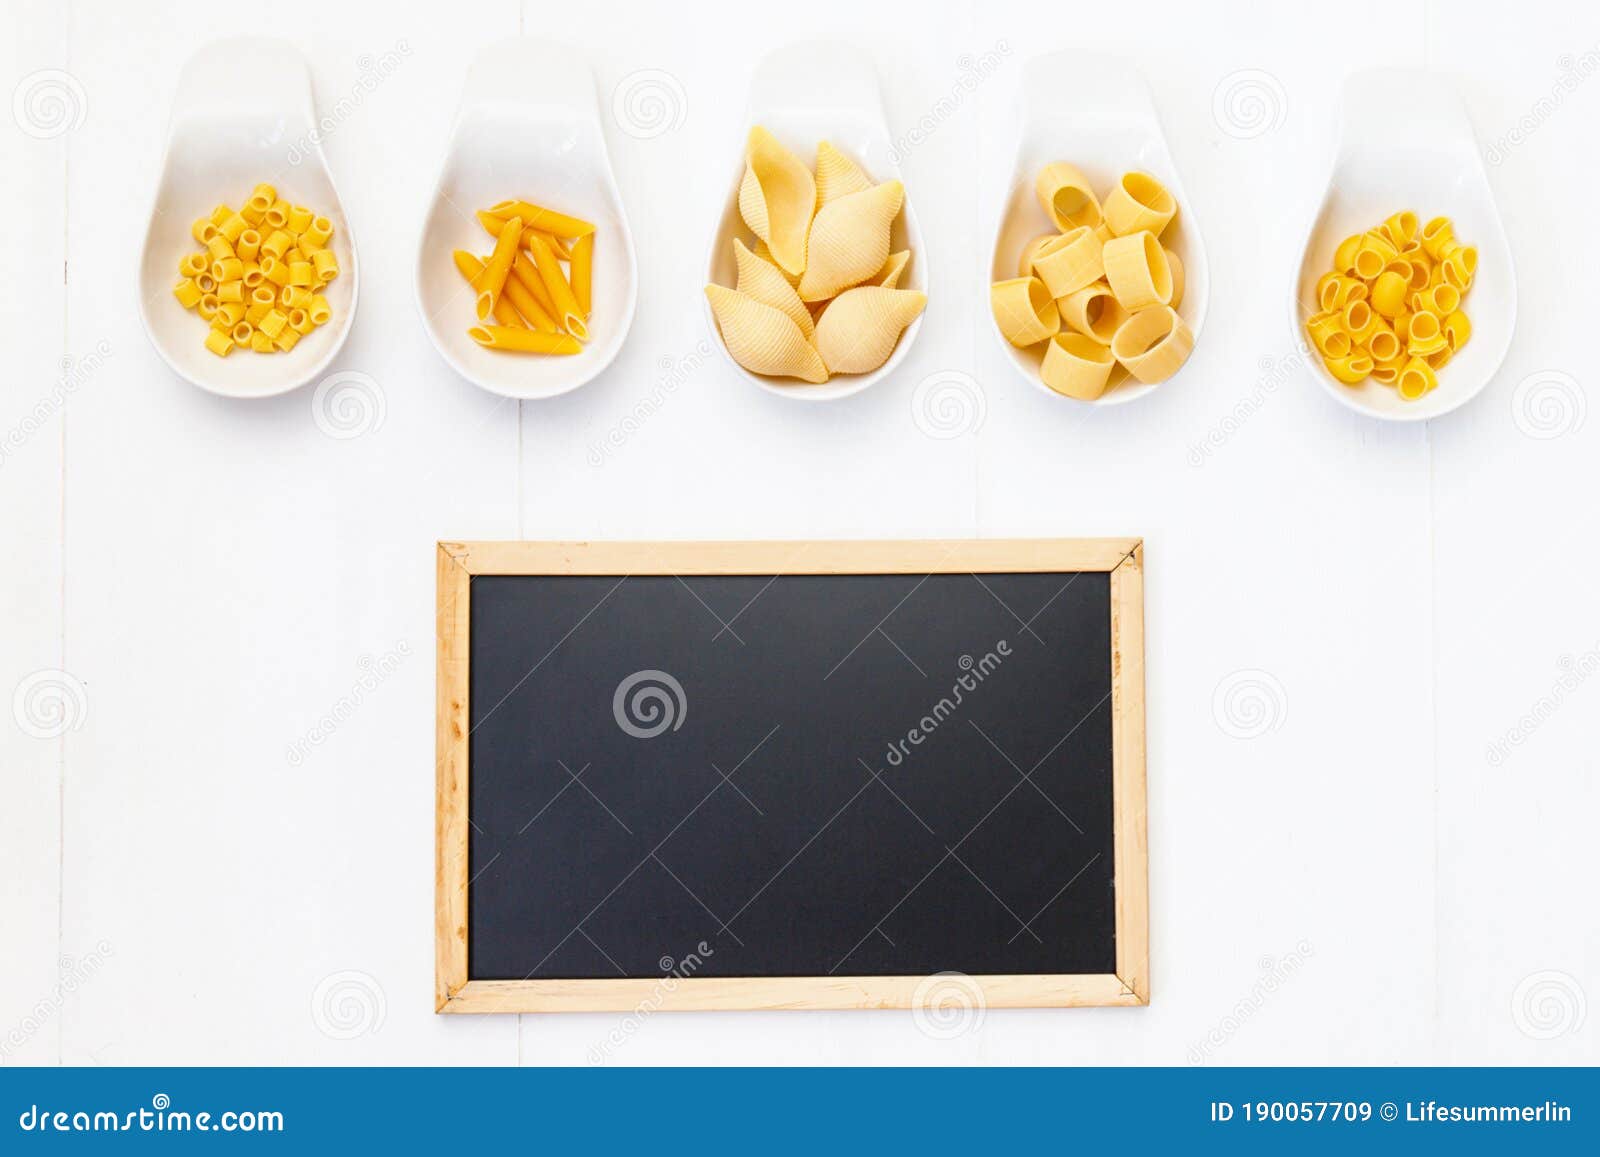 Download 1 695 Mockup Pasta Photos Free Royalty Free Stock Photos From Dreamstime